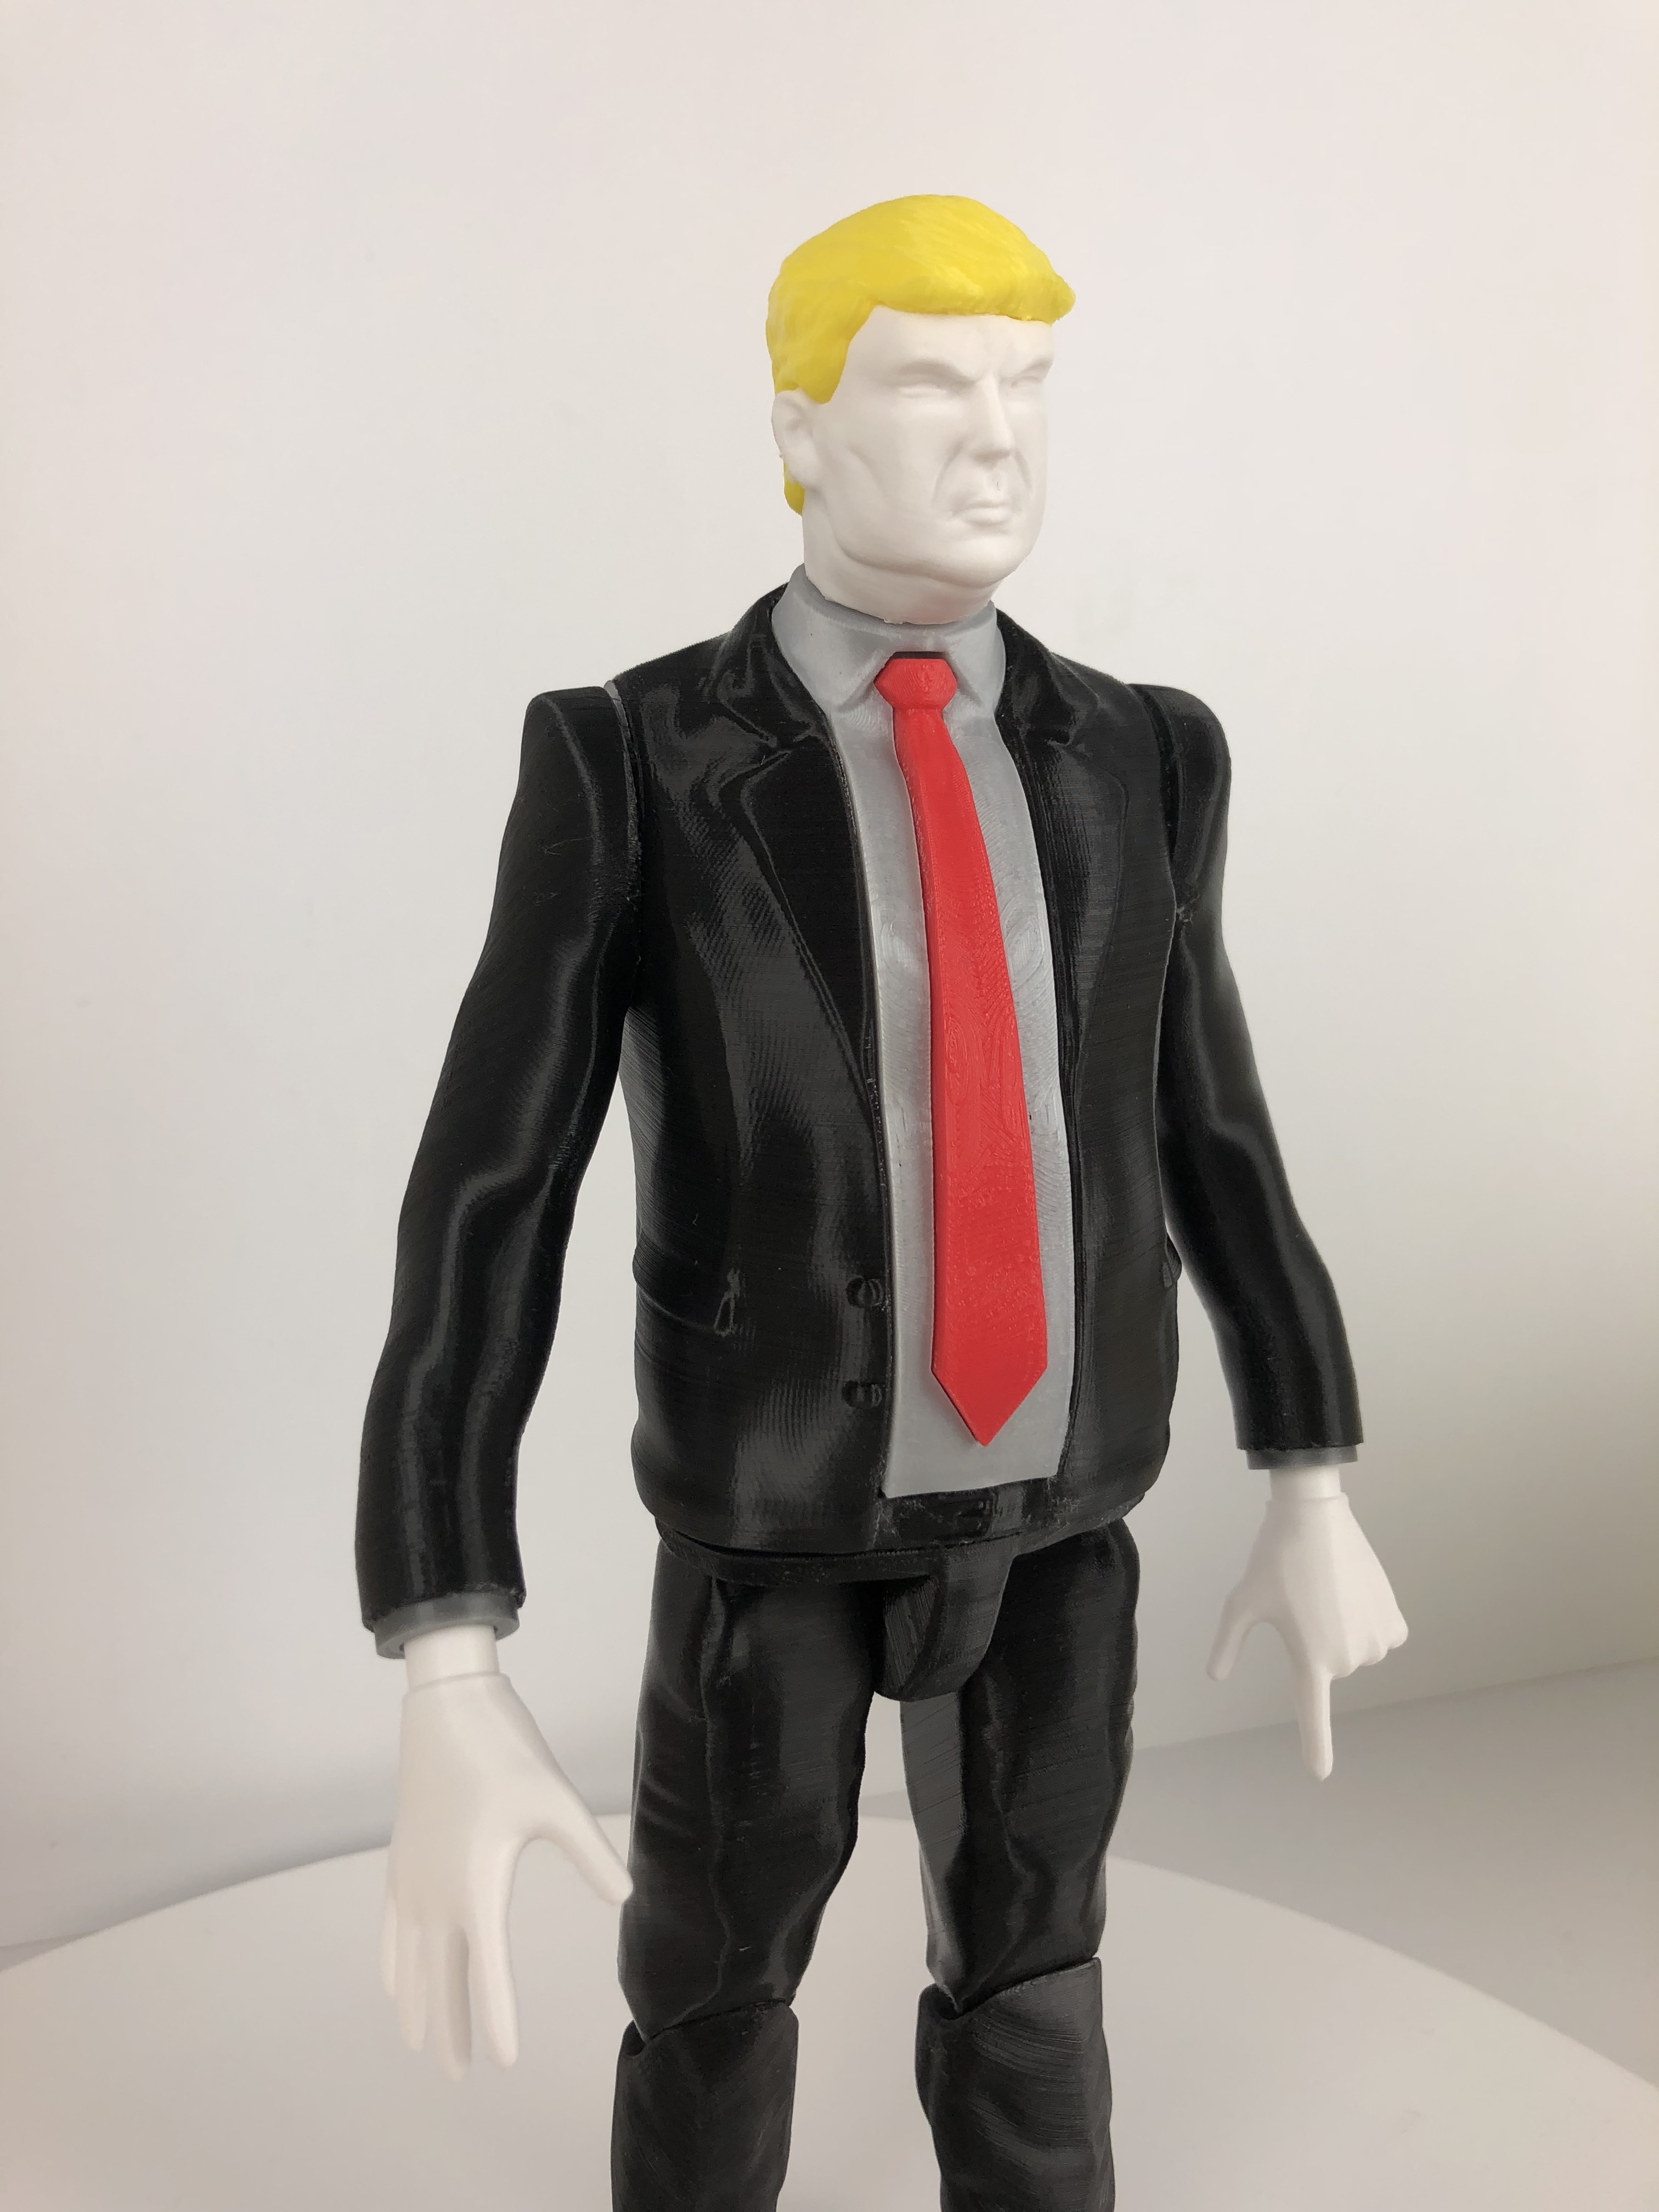 3d Printable Model: Articulated Action Figure Toy With Full Body Download